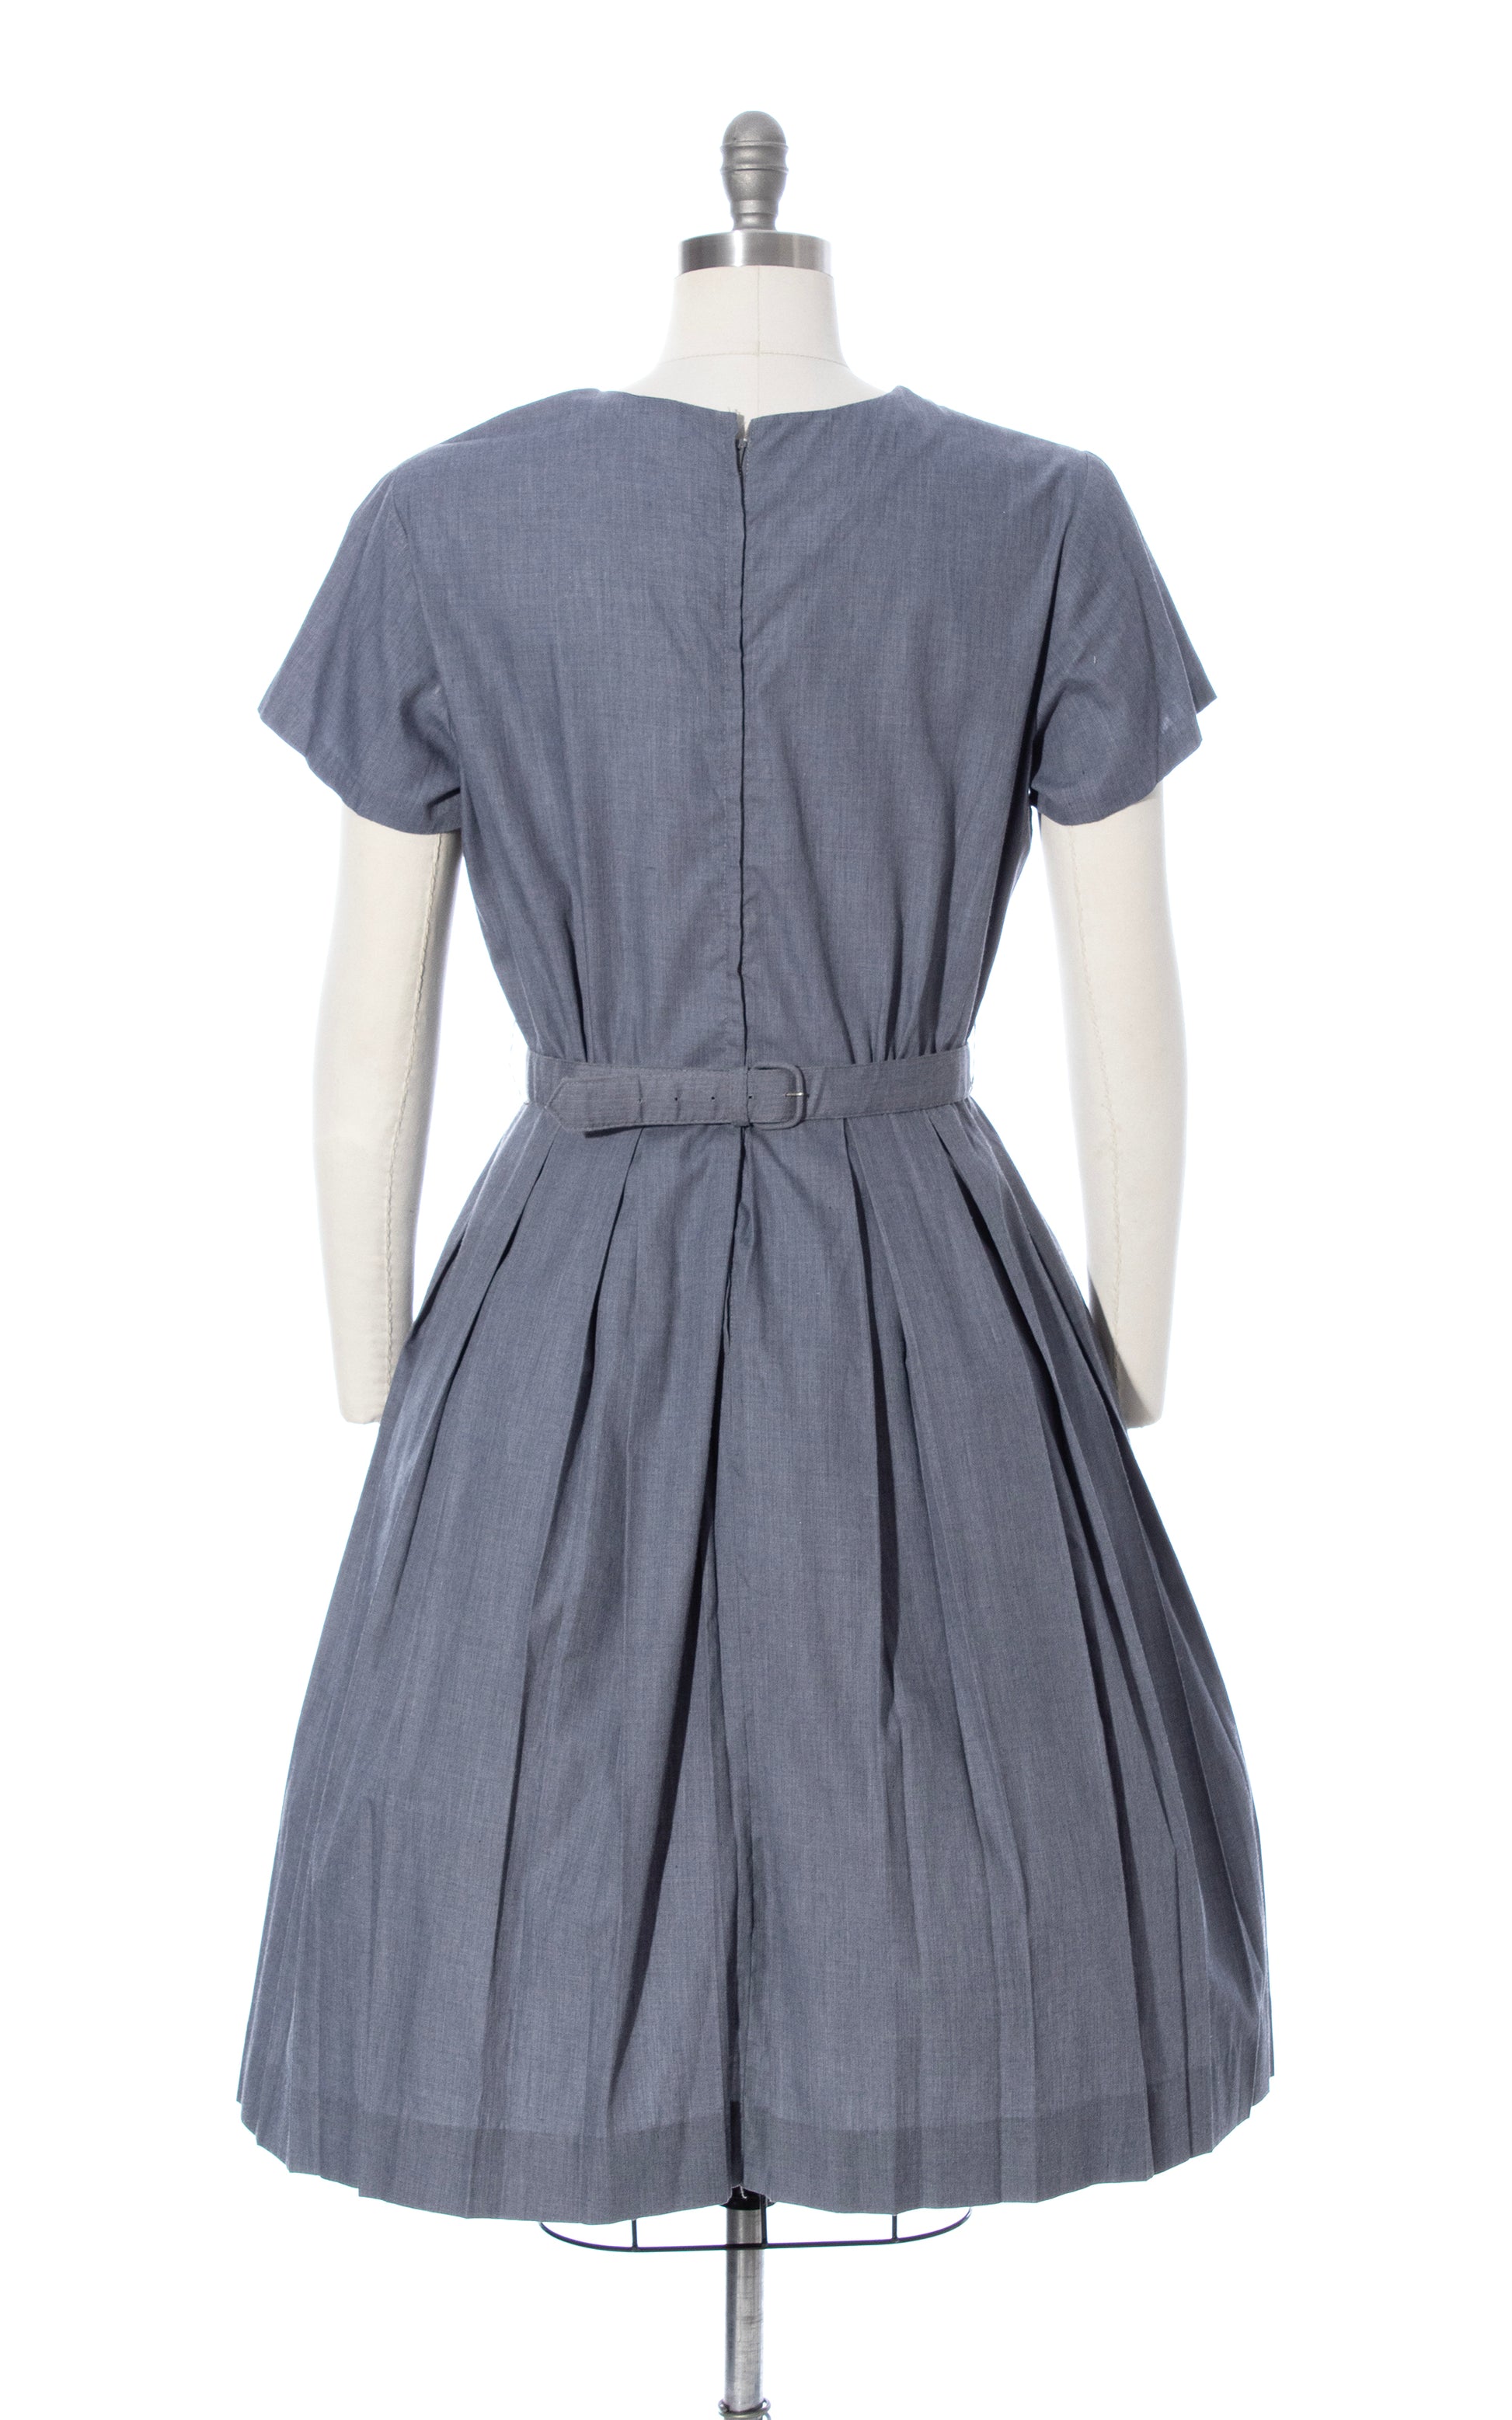 Vintage 1950s 50s Grey Fit and Flare Cotton Day Dress with Bow Belt BirthdayLifeVintage